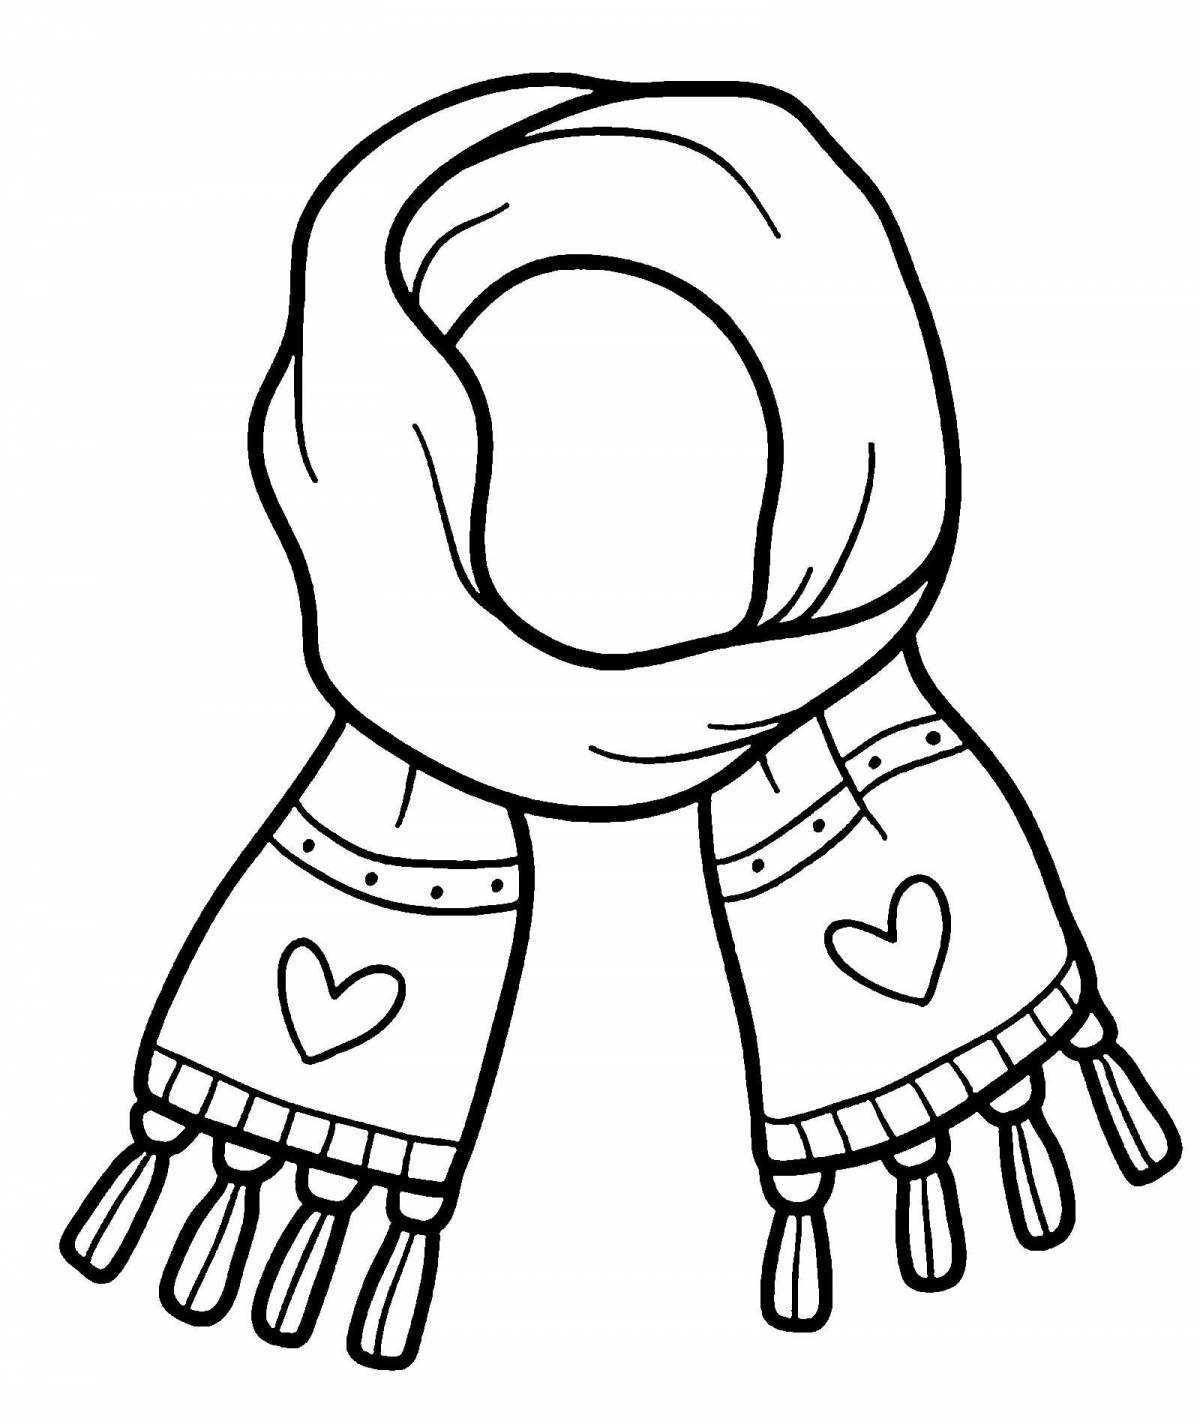 A live scarf coloring for children